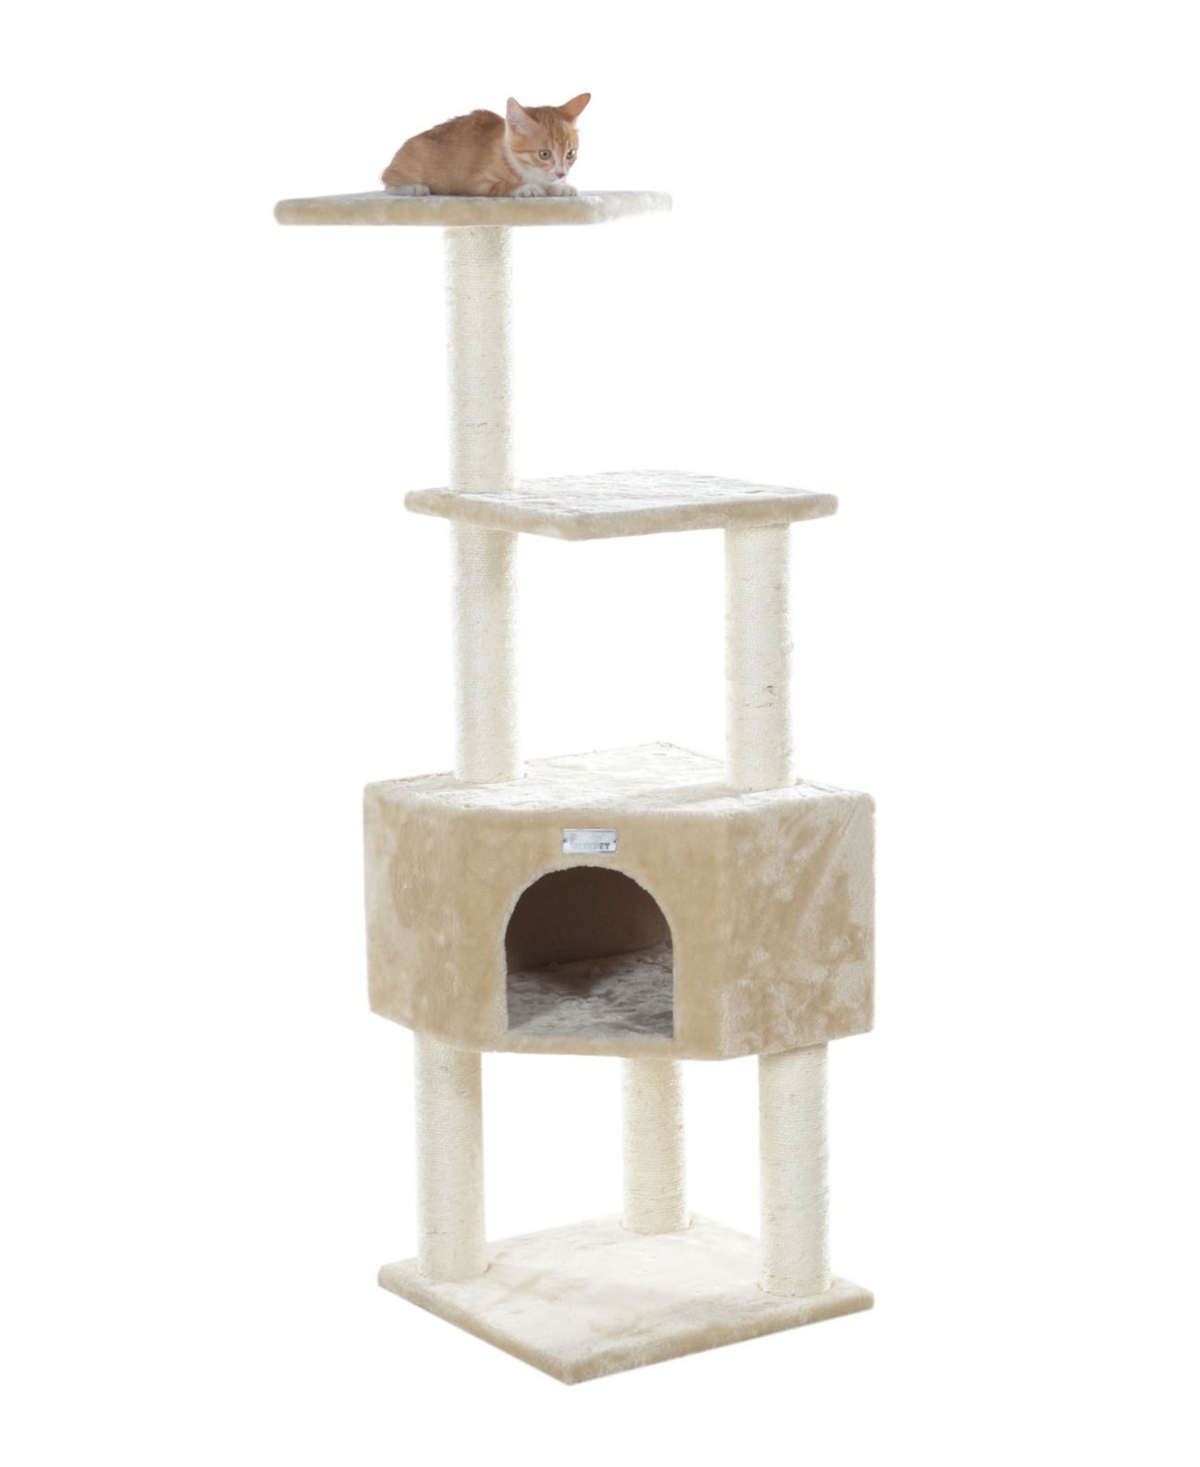 48-Inch Real Wood Cat Tree With Perch & Playhouse - Beige